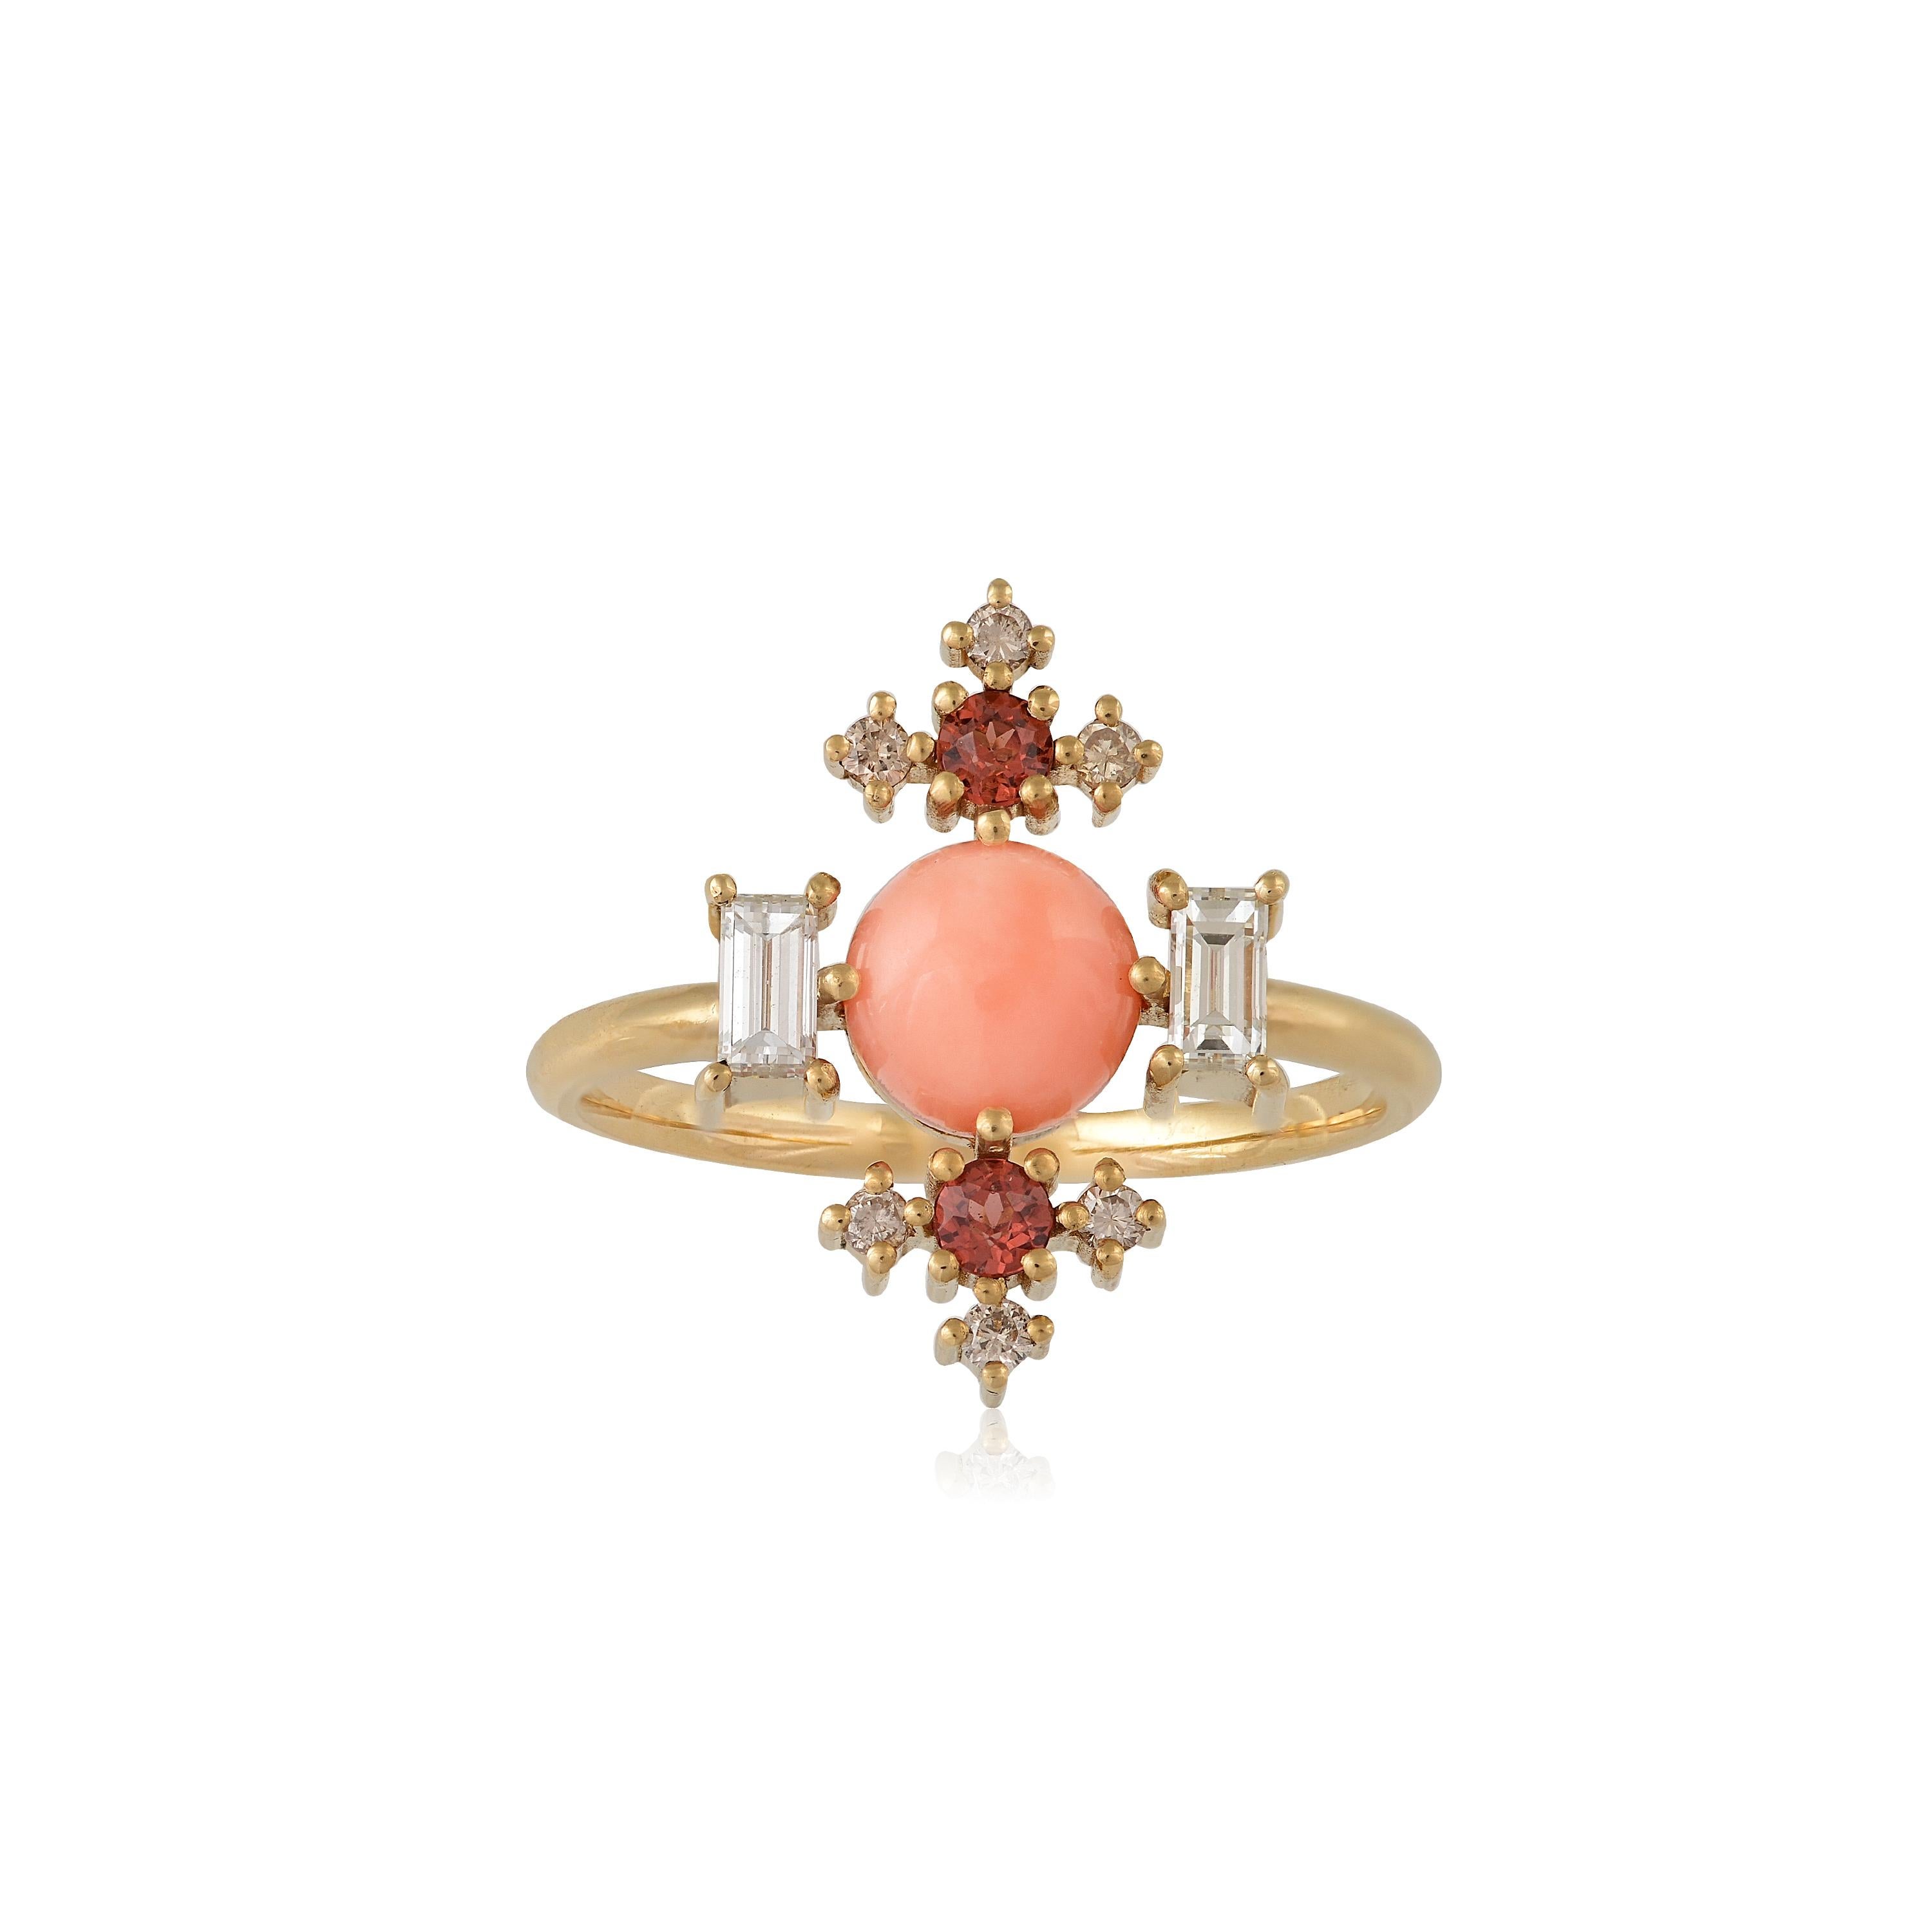 Designer: Alexia Gryllaki
Dimensions: L18x21mm
Ring Size UK P, US 7 3/4
Weight: approximately 4.0g  
Barcode: OFS031

Multi-stone ring in 18 karat yellow gold with a round cabochon coral approx. 0.60cts, round faceted garnets approx. 0.16cts,